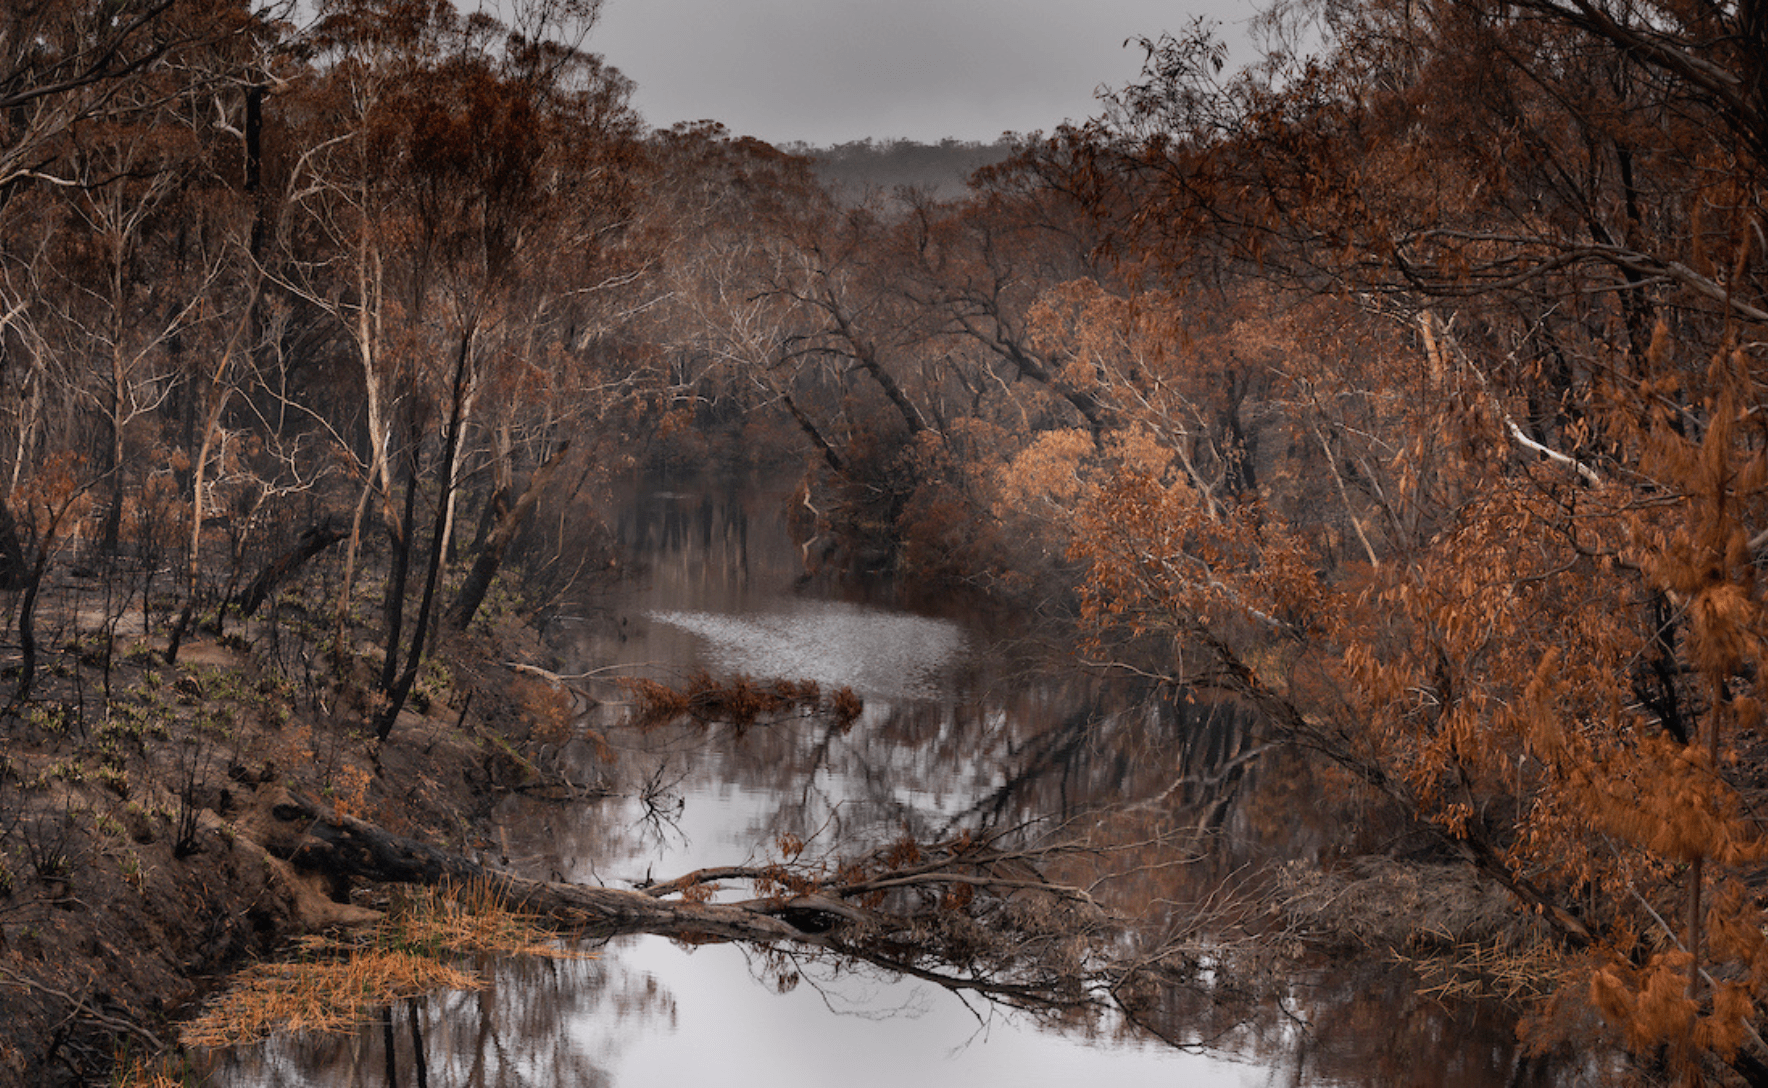 Burnt trees on either side of a river